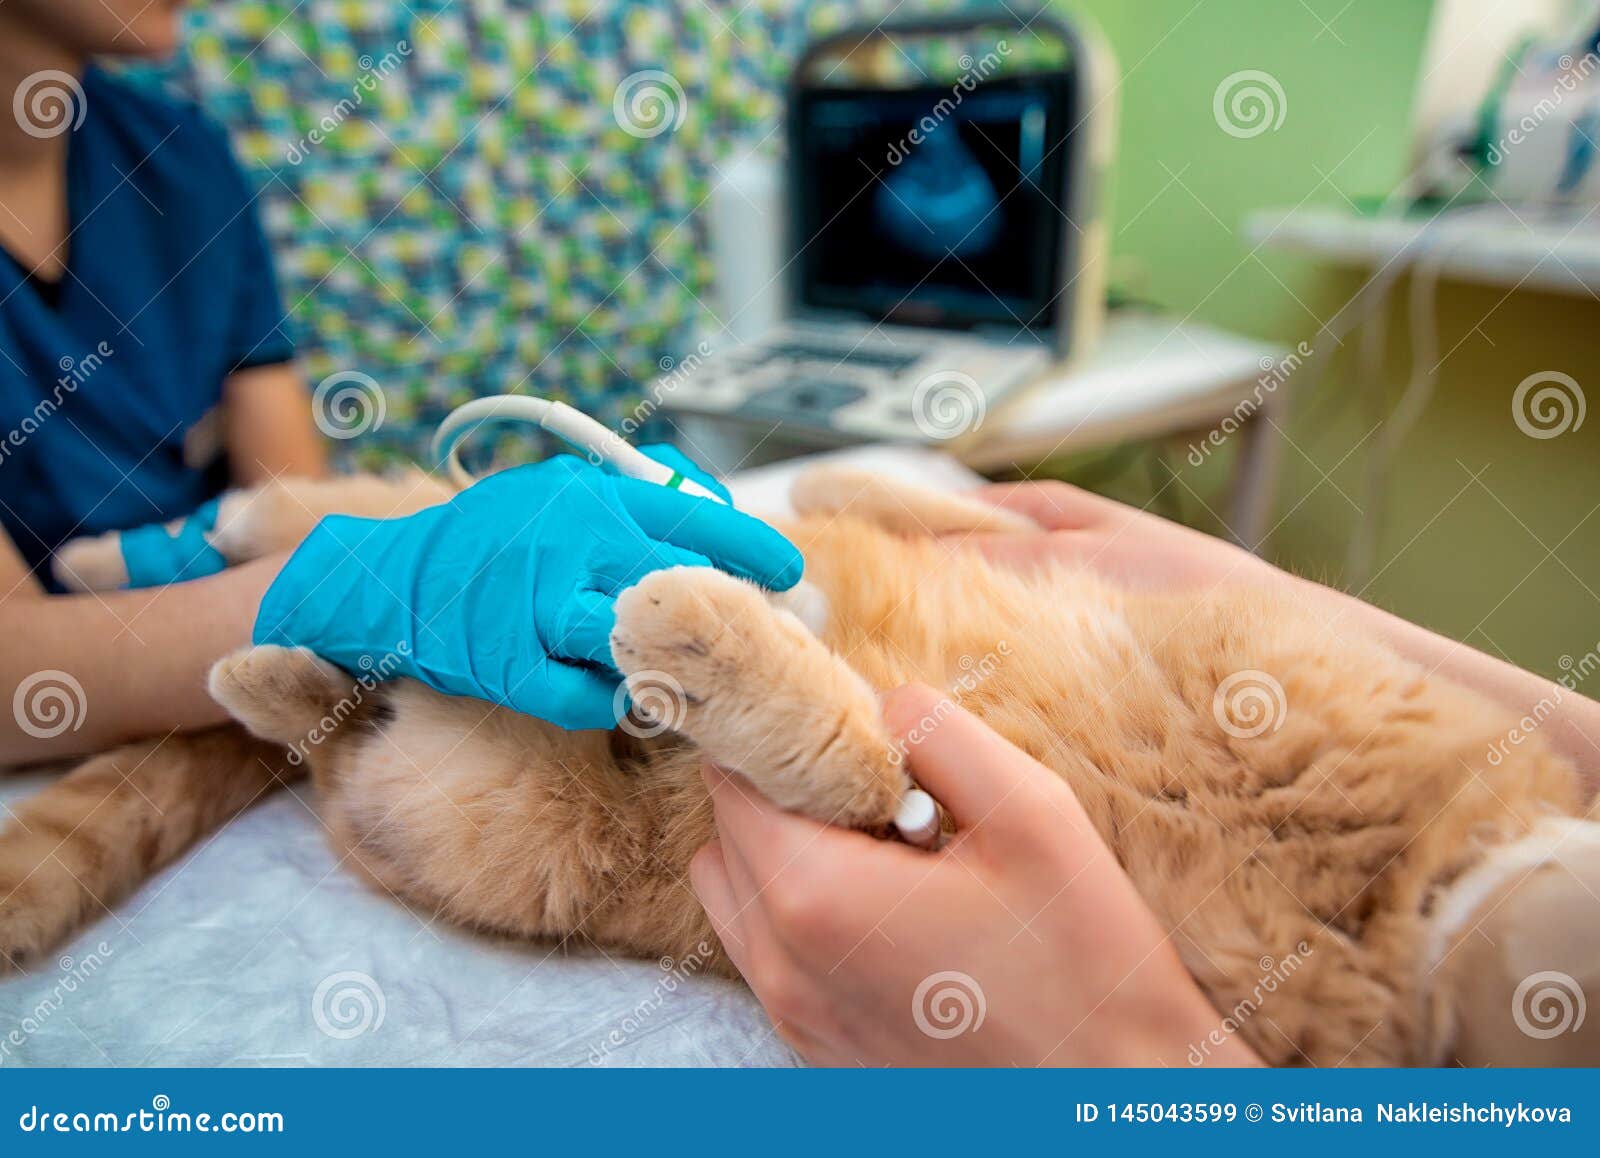 the doctor does an ultrasound examination of the cat`s abdomen, an animal on the operating table, a doctor and a patient